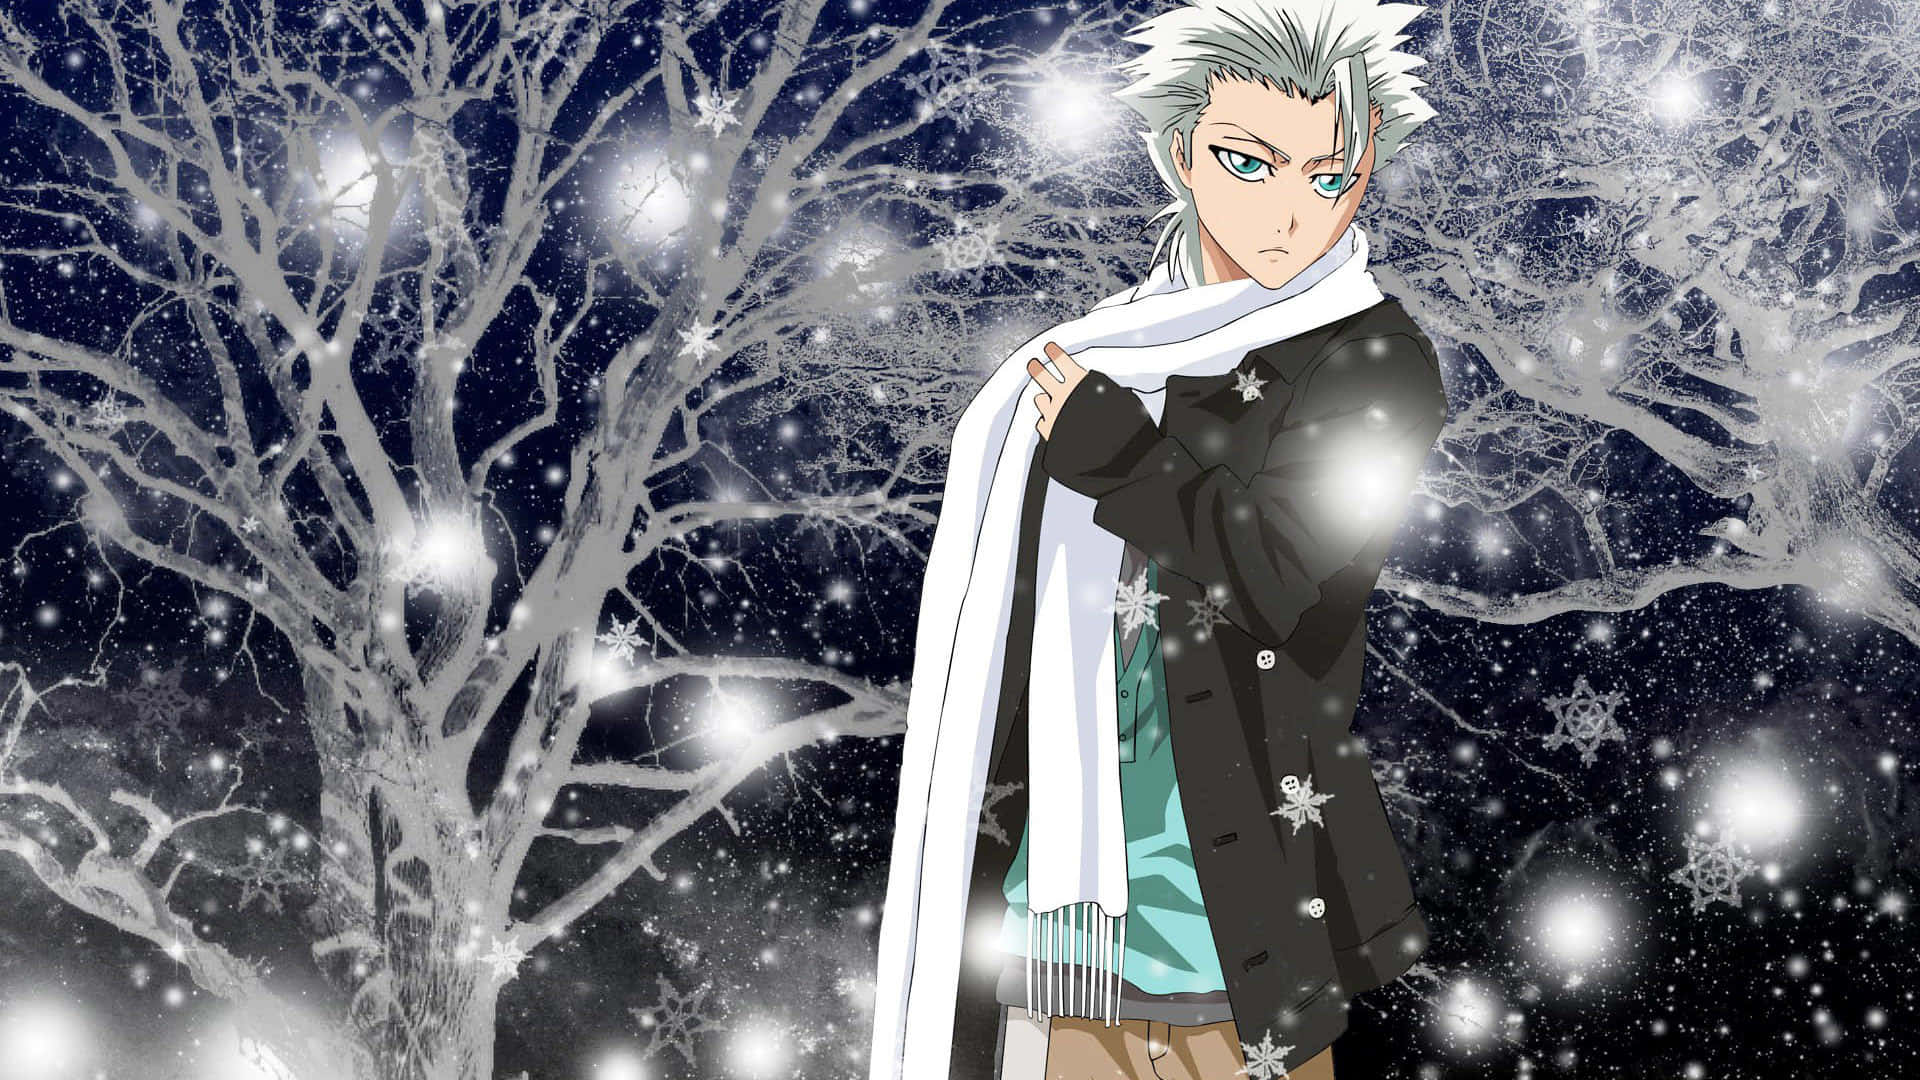 Toshiro Hitsugaya - A Powerful Soul Reaper From The Anime, Bleach Background